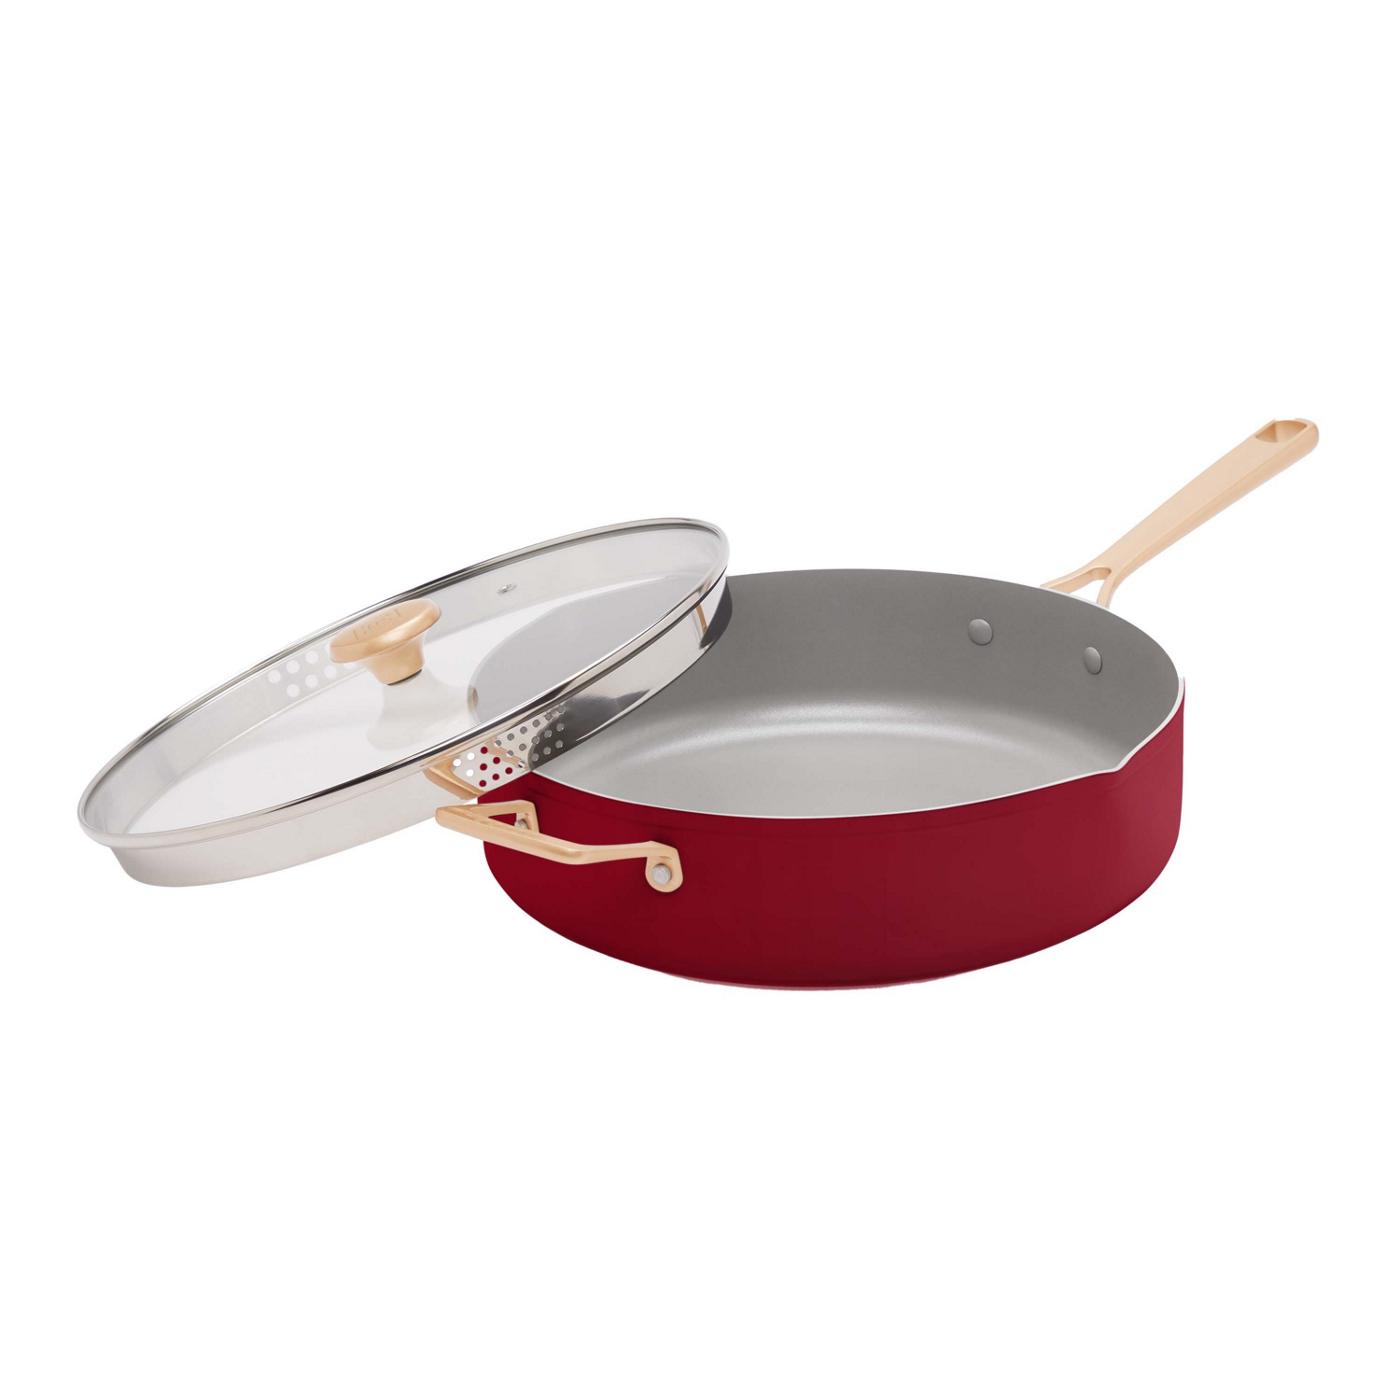 Kitchen & Table by H-E-B Non-Stick Sauté Pan with Strainer Lid - Bordeaux Red; image 1 of 7